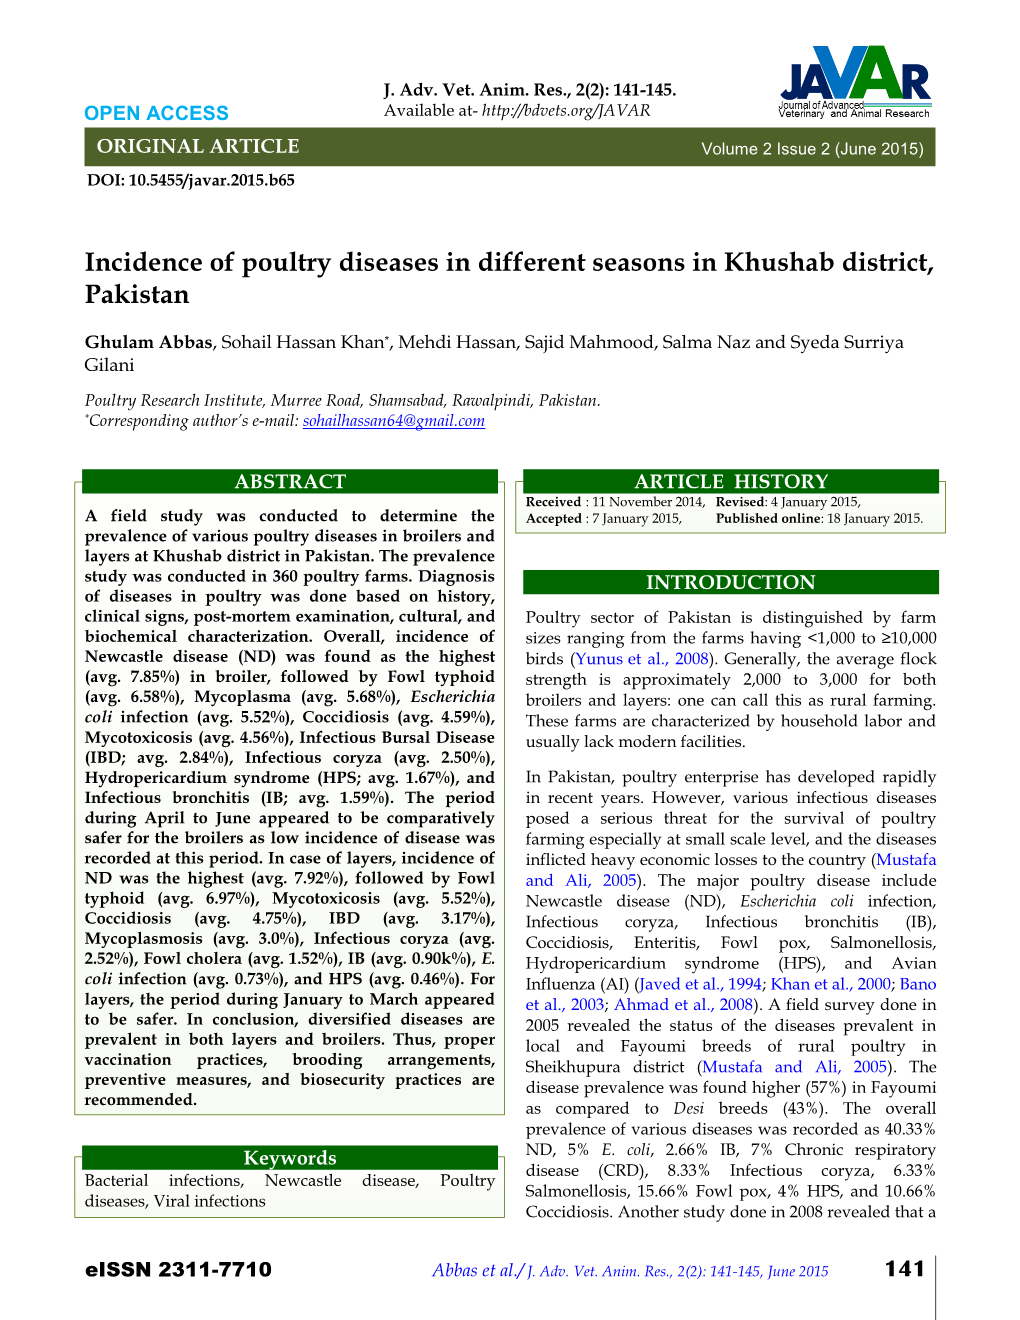 Incidence of Poultry Diseases in Different Seasons in Khushab District, Pakistan